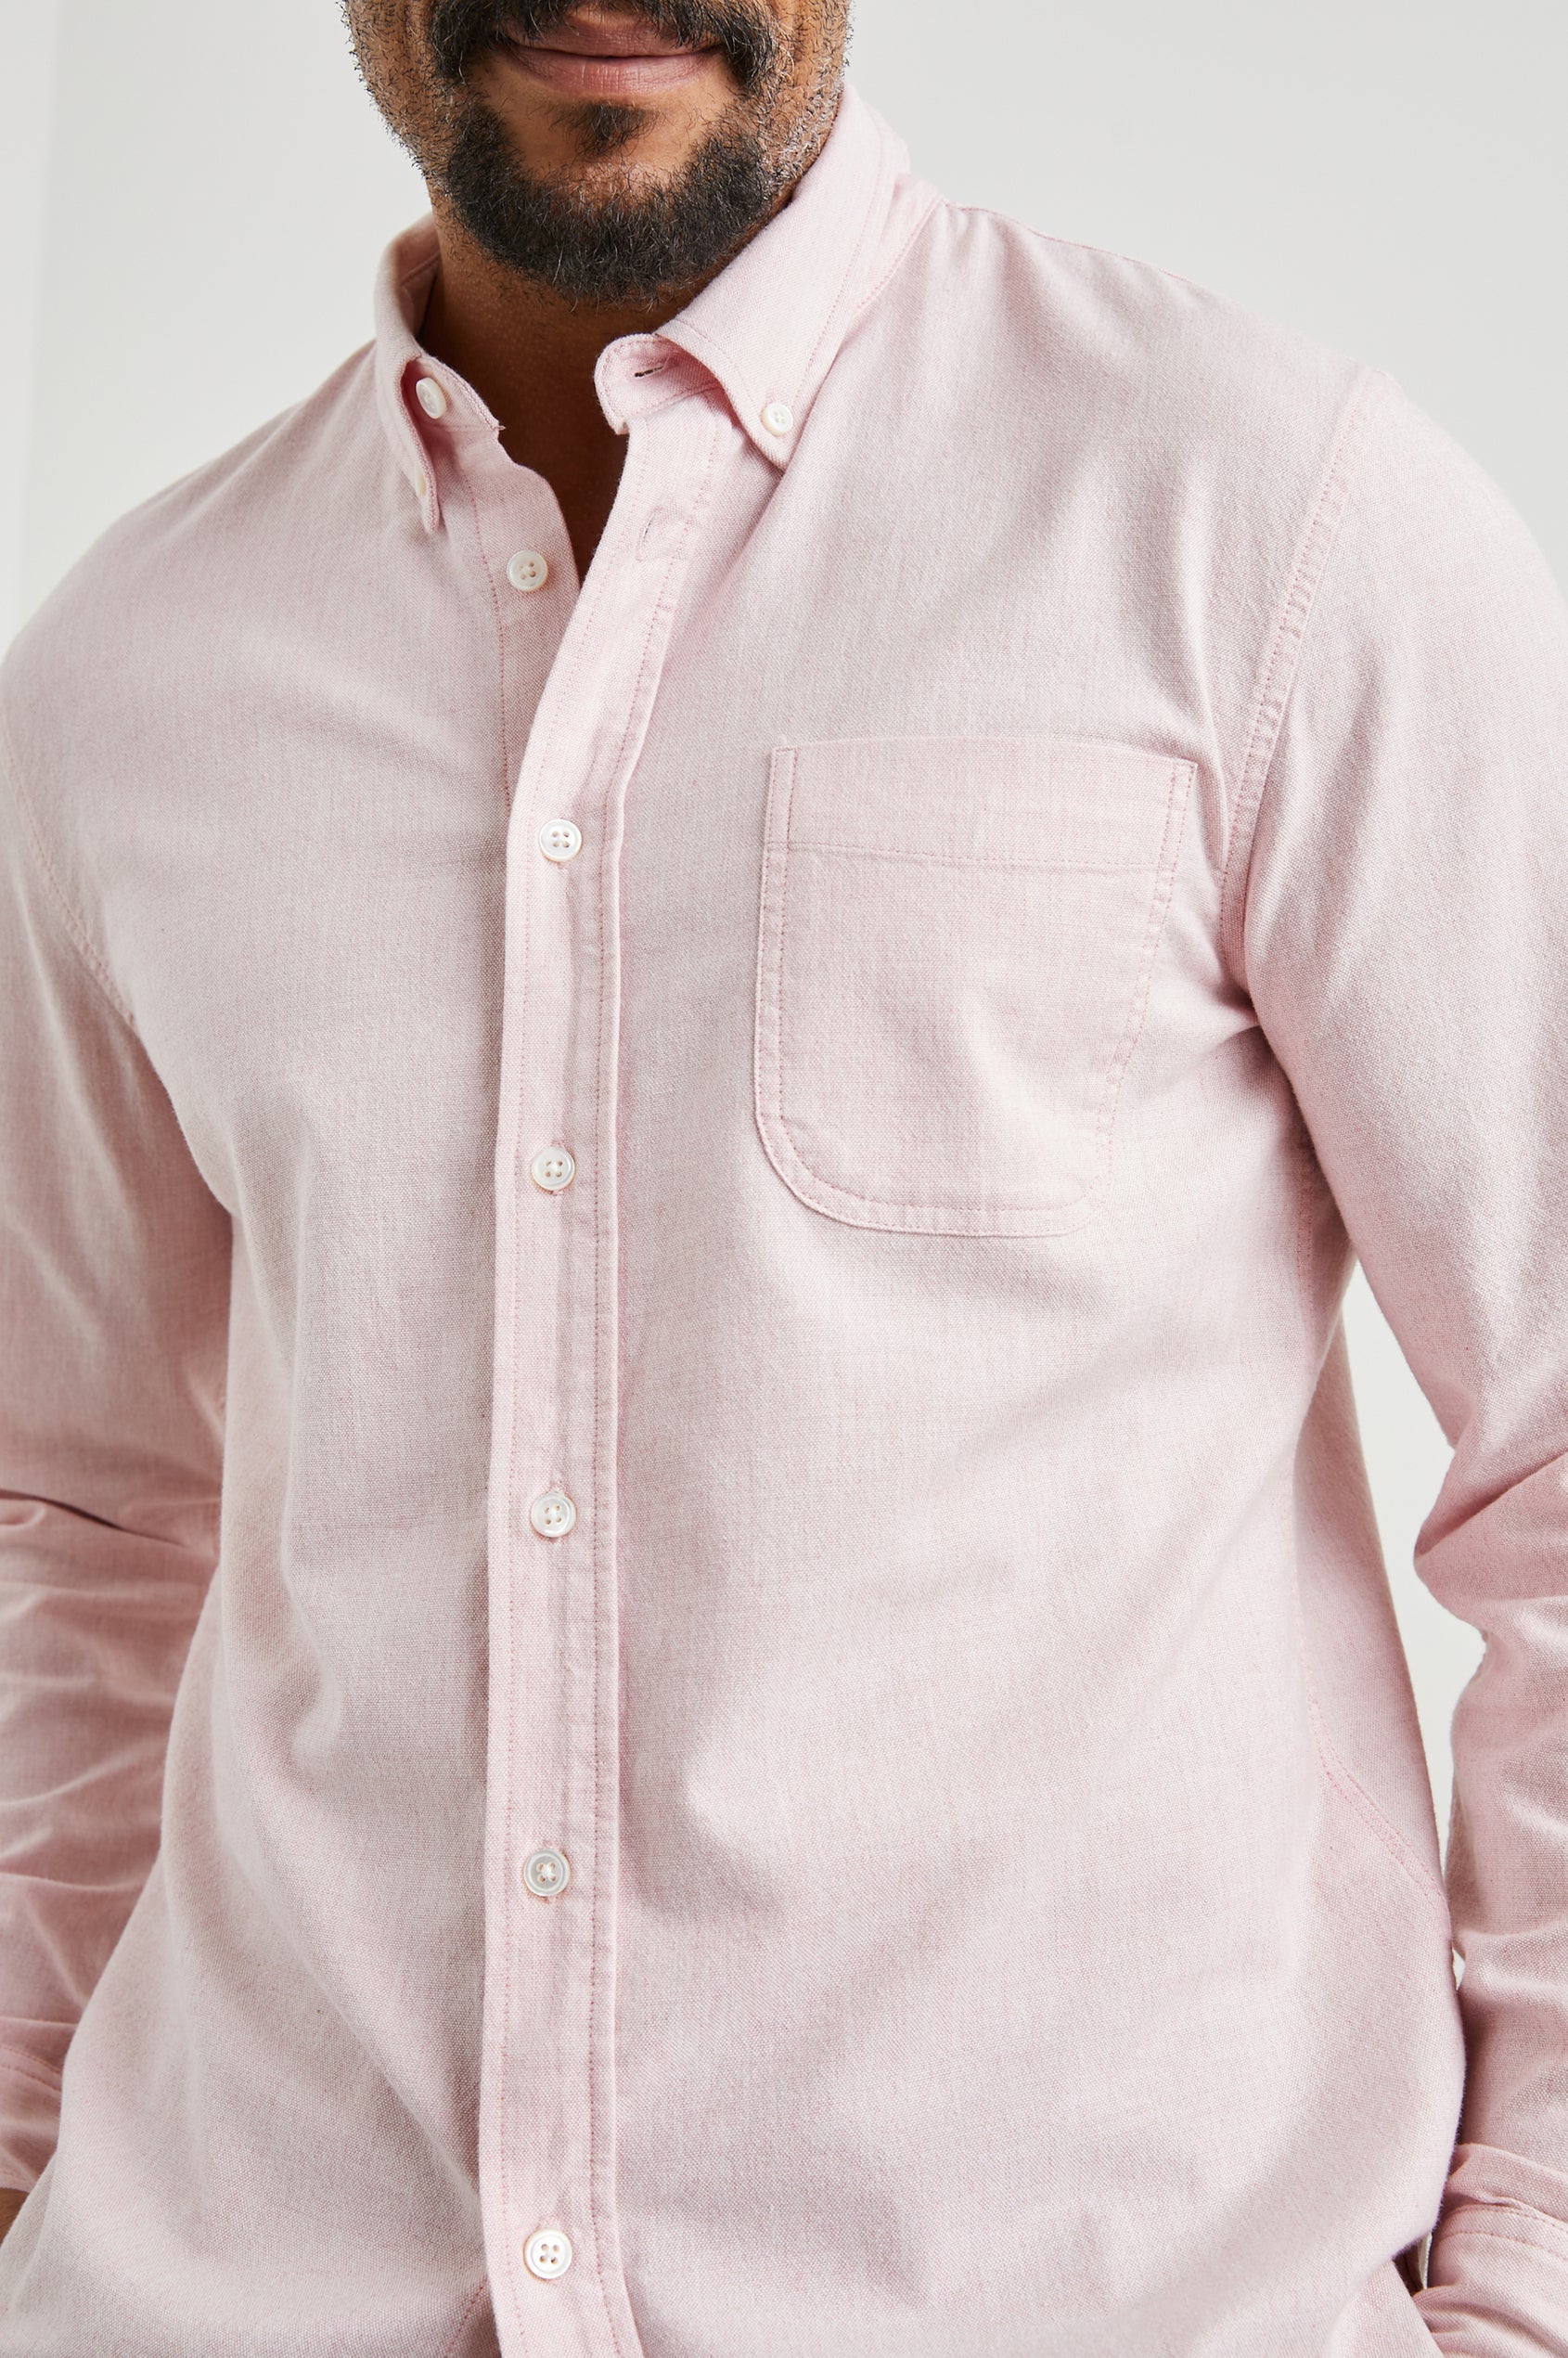 PERRY SHIRT - PINK OXFORD